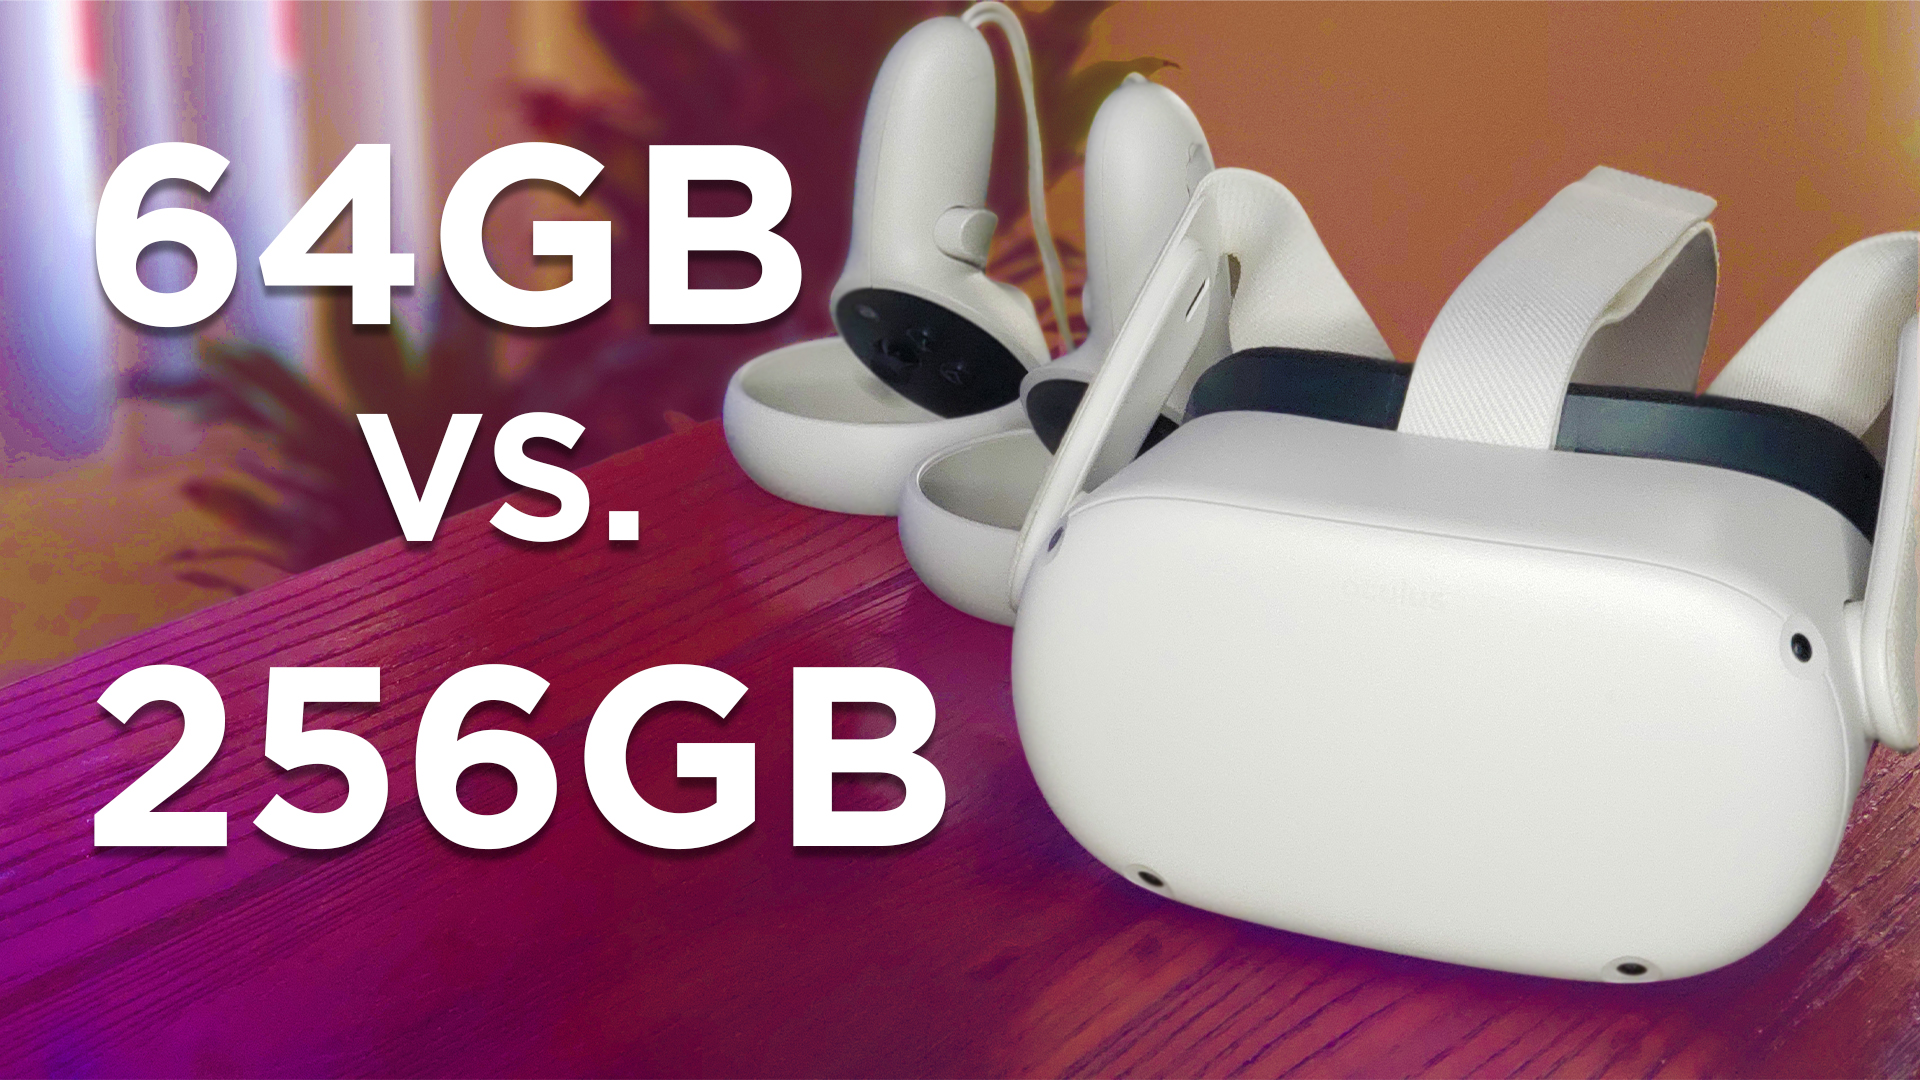 64GB vs. 256GB - Which Oculus Quest 2 Should You Buy? - VRScout